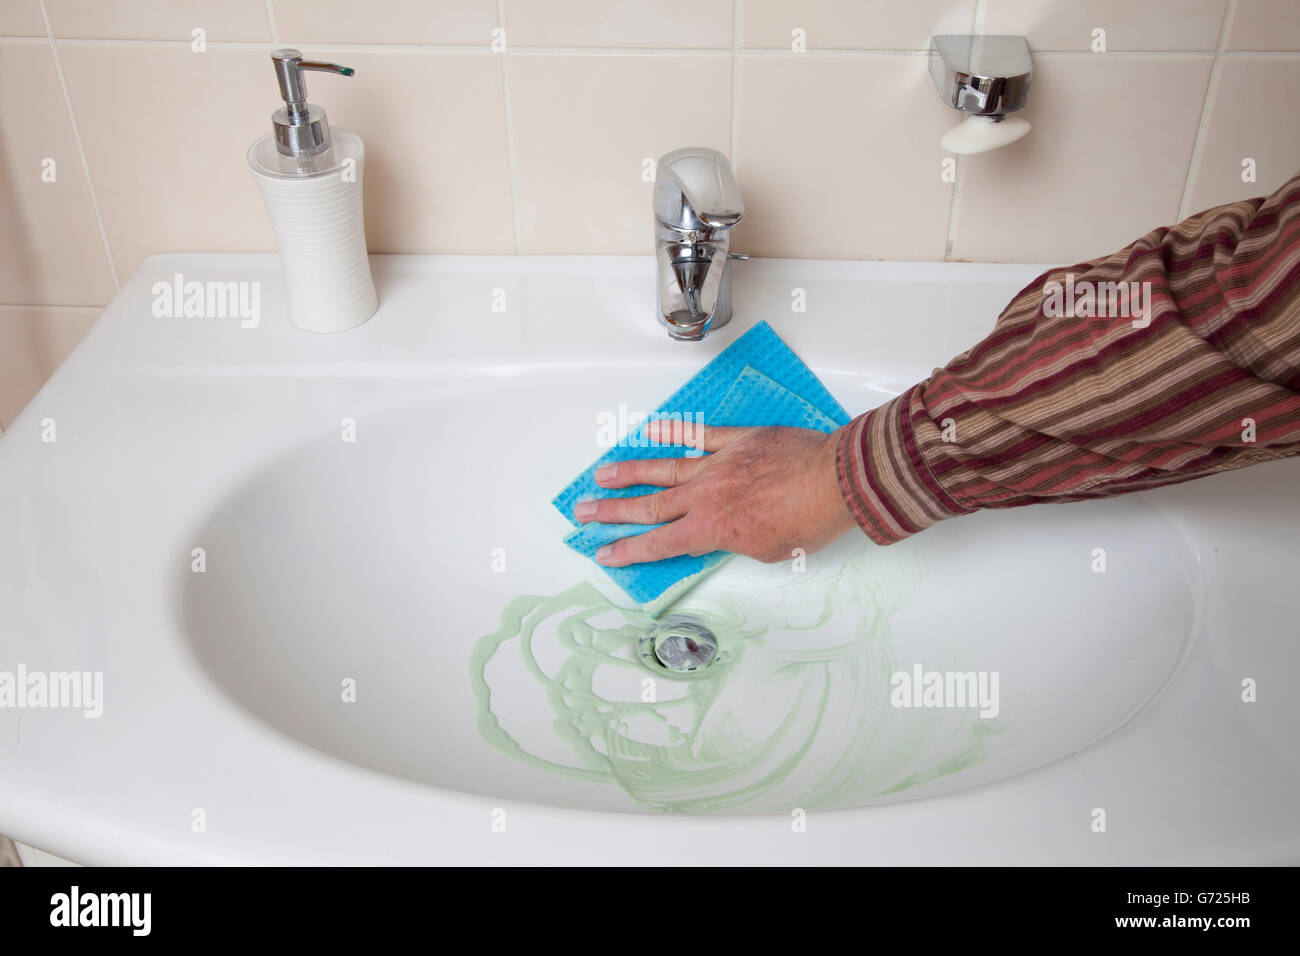 Man cleaning sink Stock Photo